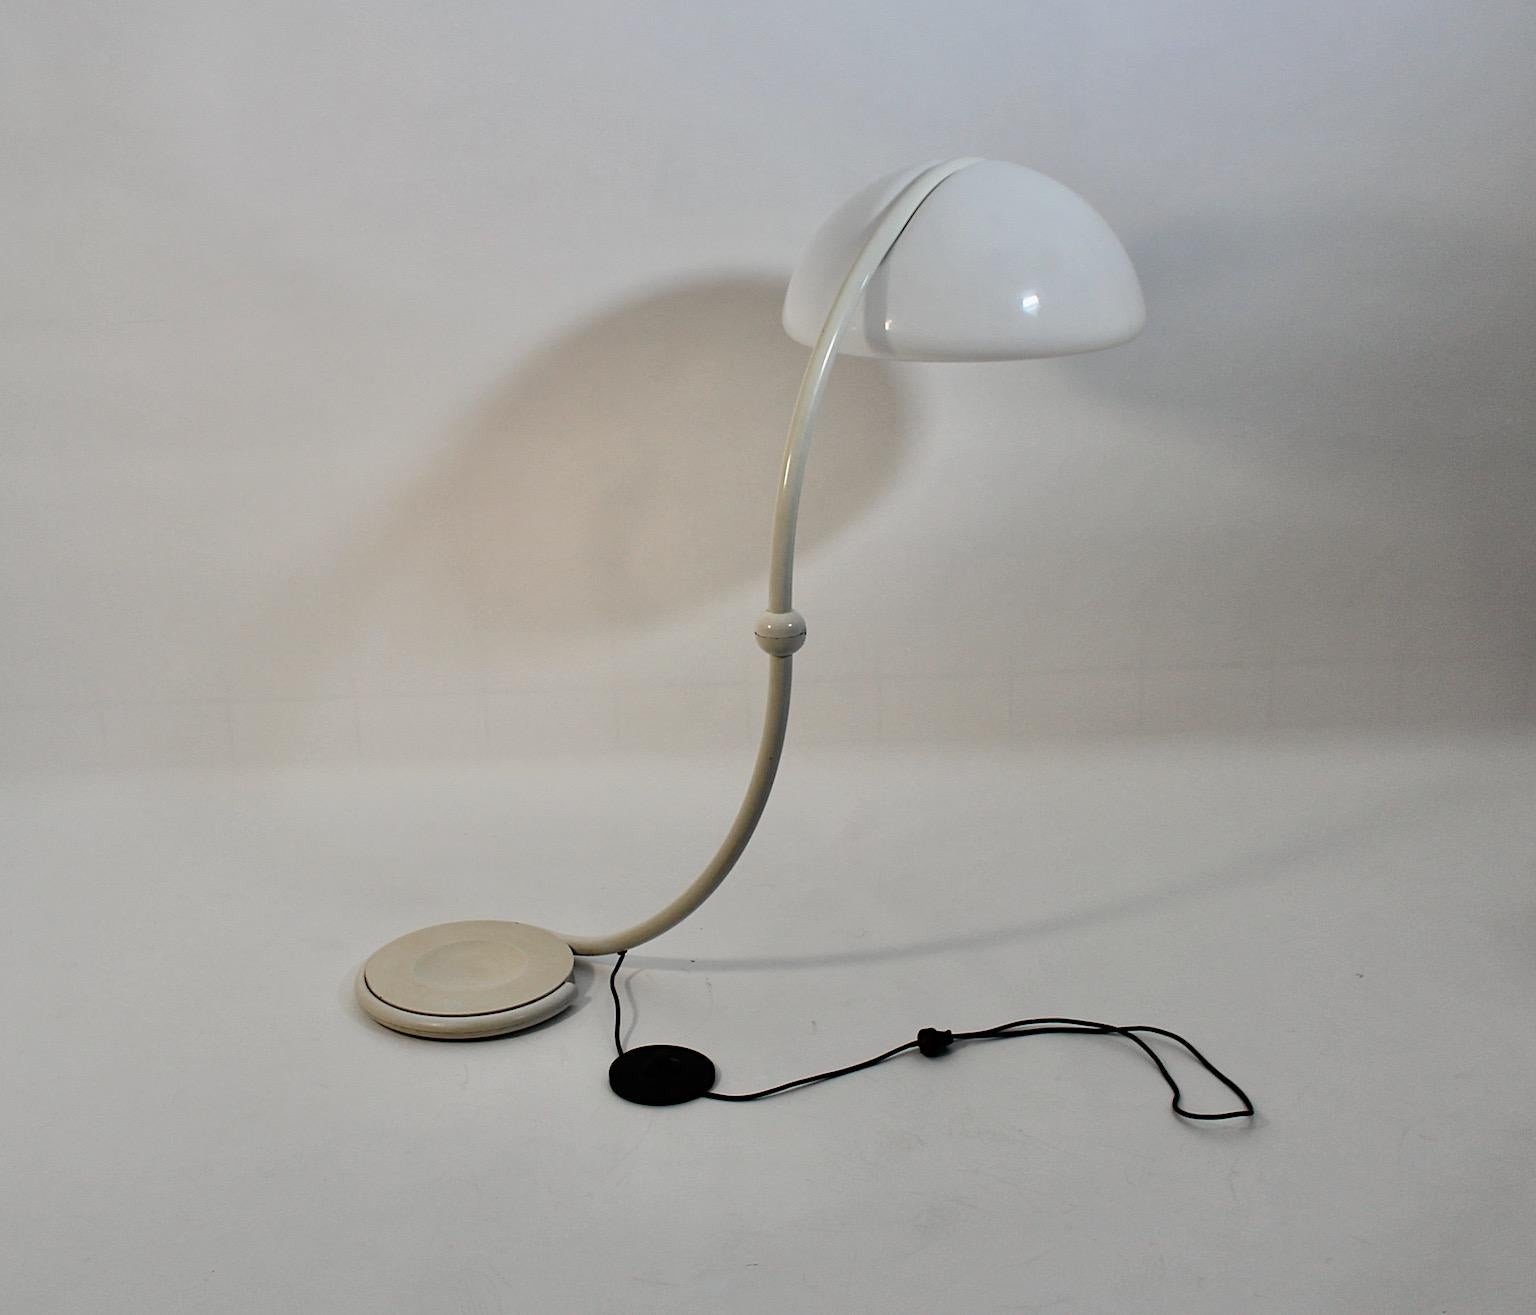 Space Age Vintage Floor Lamp White Plastic Metal Elio Martinelli 1970s Italy For Sale 4